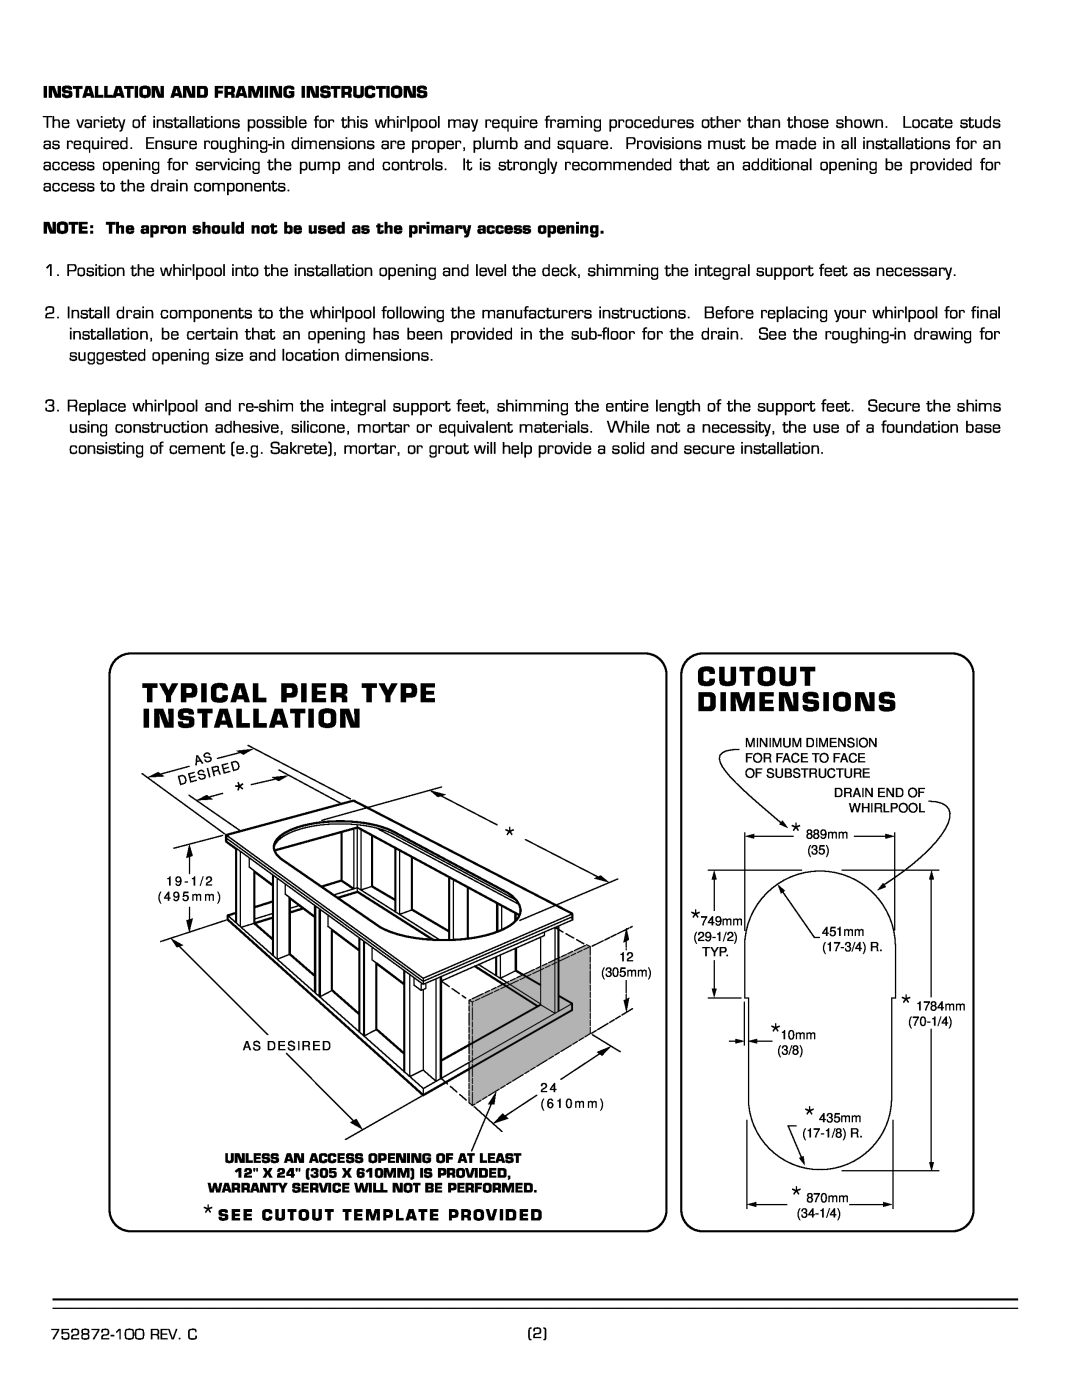 American Standard 2806E Typical Pier Type Installation, Cutout Dimensions, Installation And Framing Instructions 